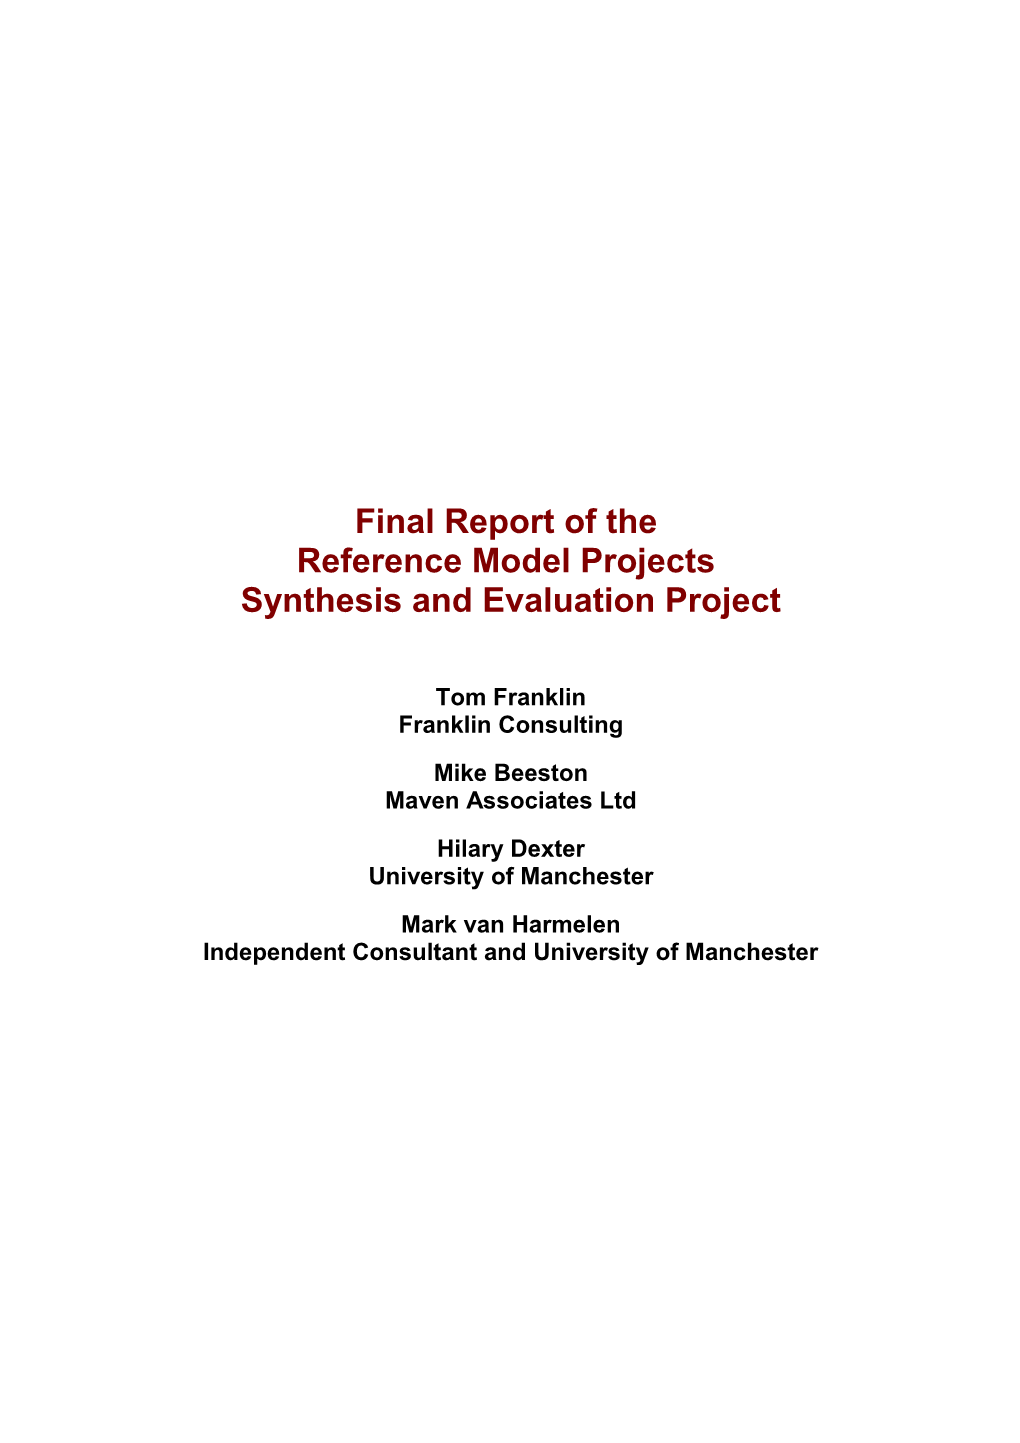 Final Report Reference Model Projects Synthesis Project